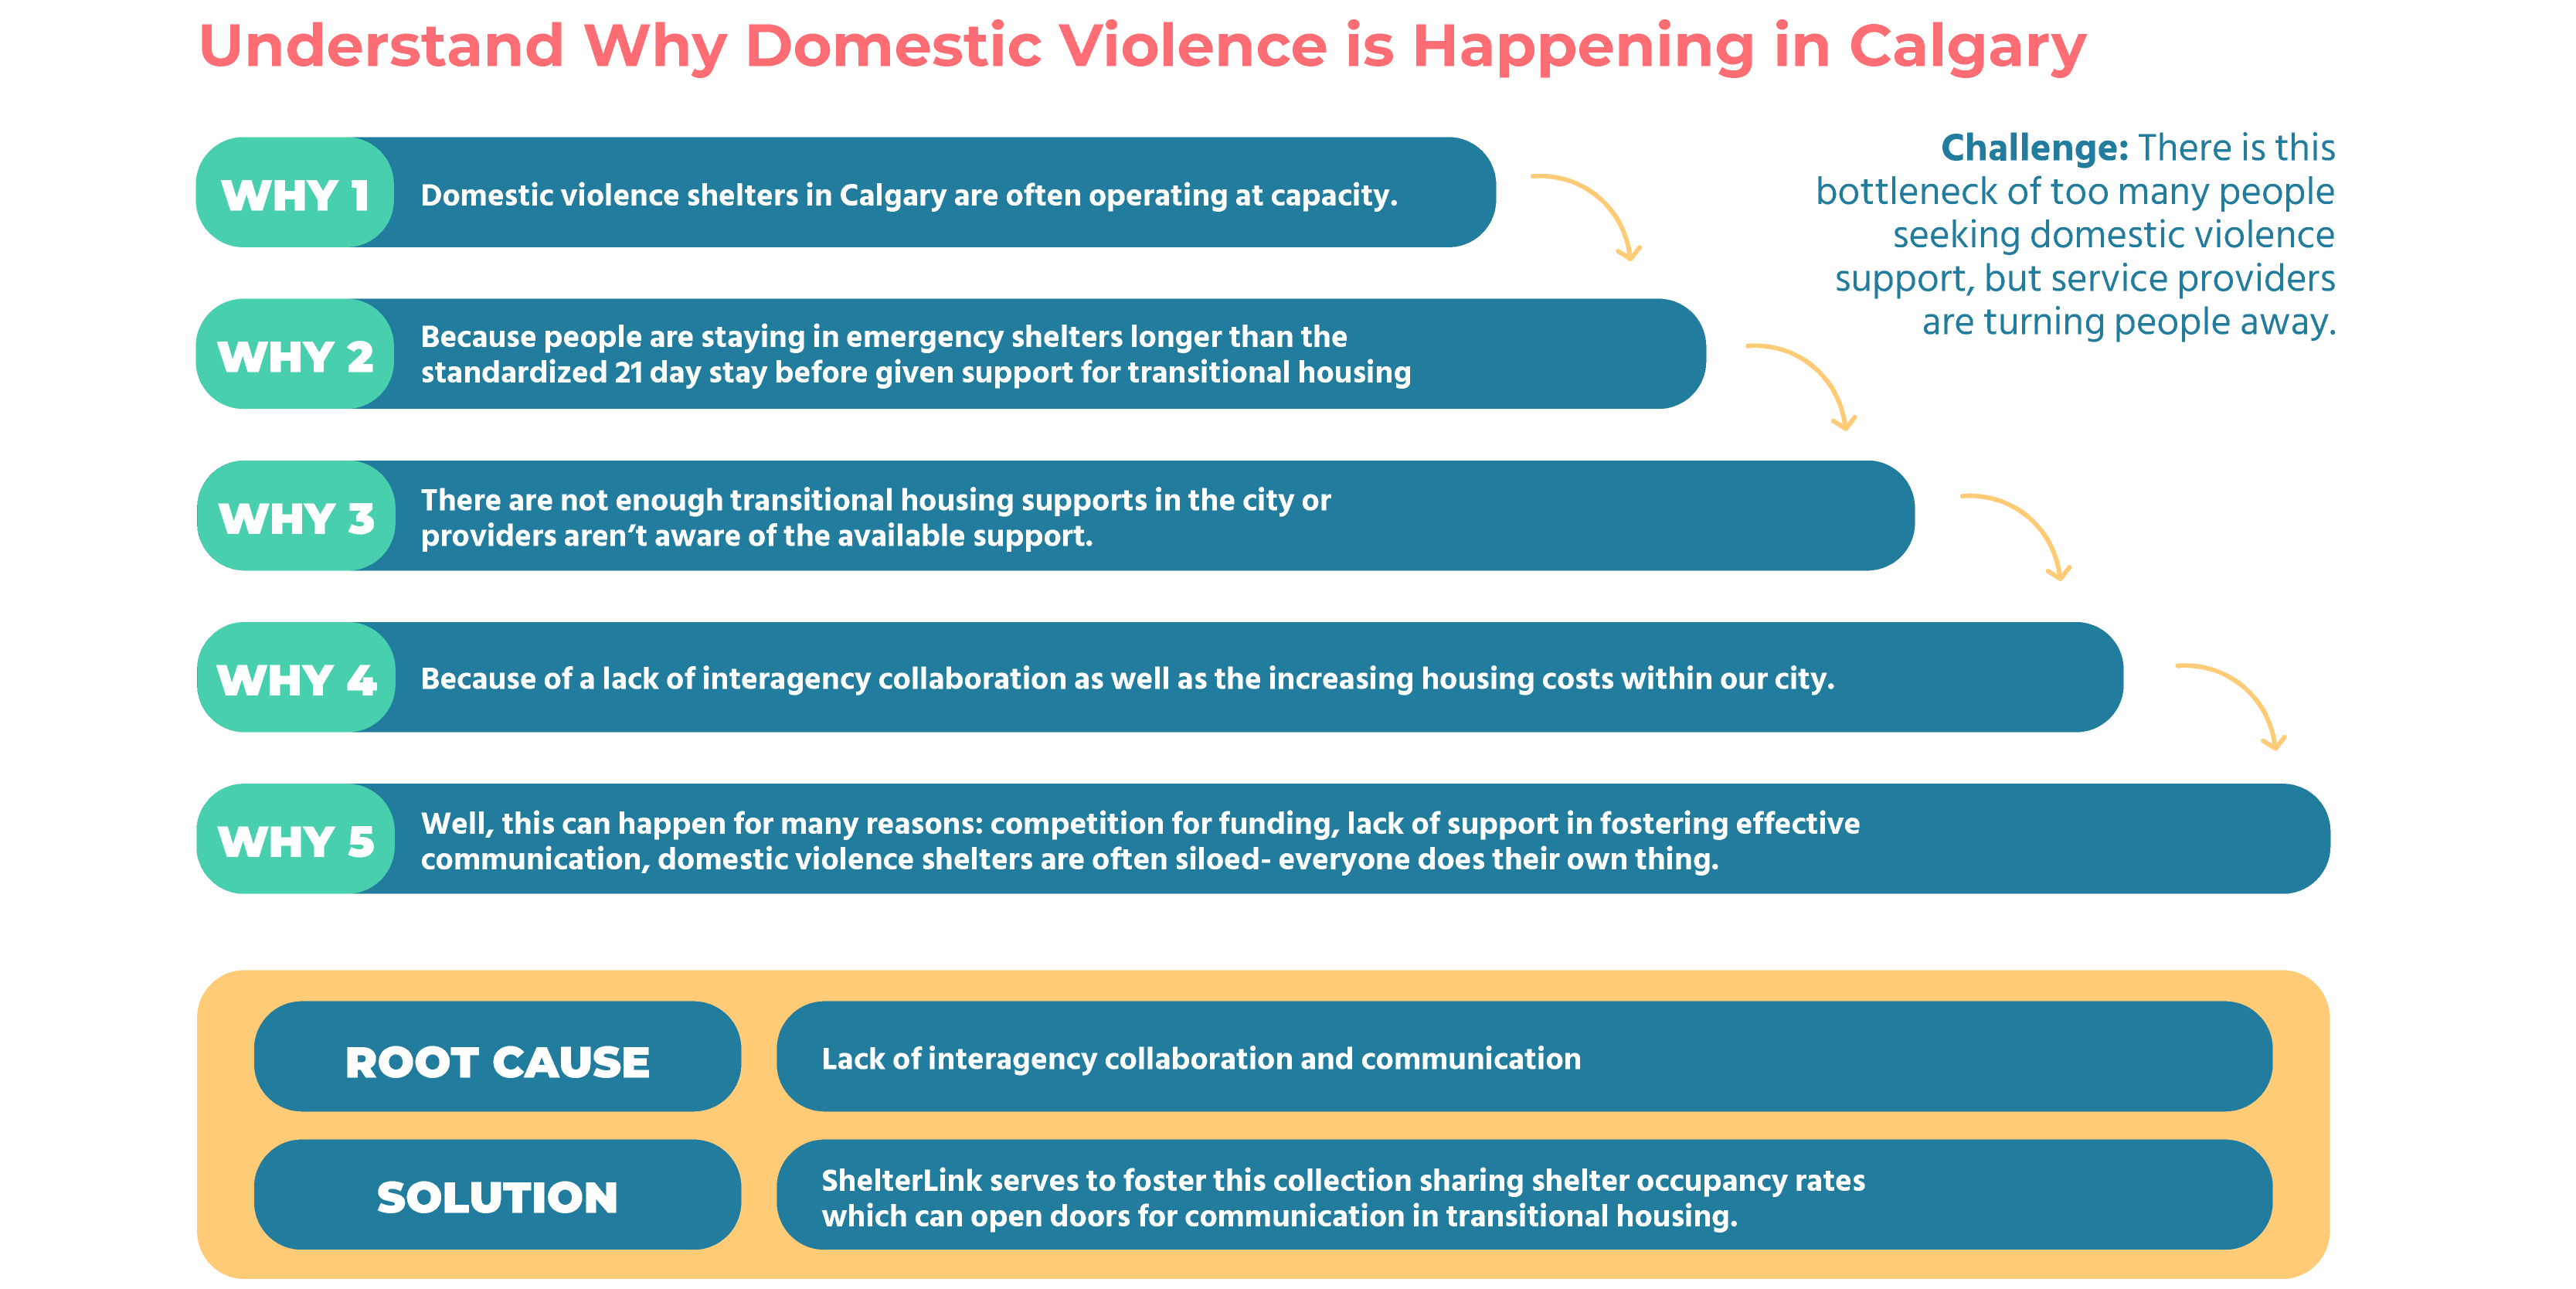 Toft’s 5 Why’s Model Understanding Domestic Violence in Calgary